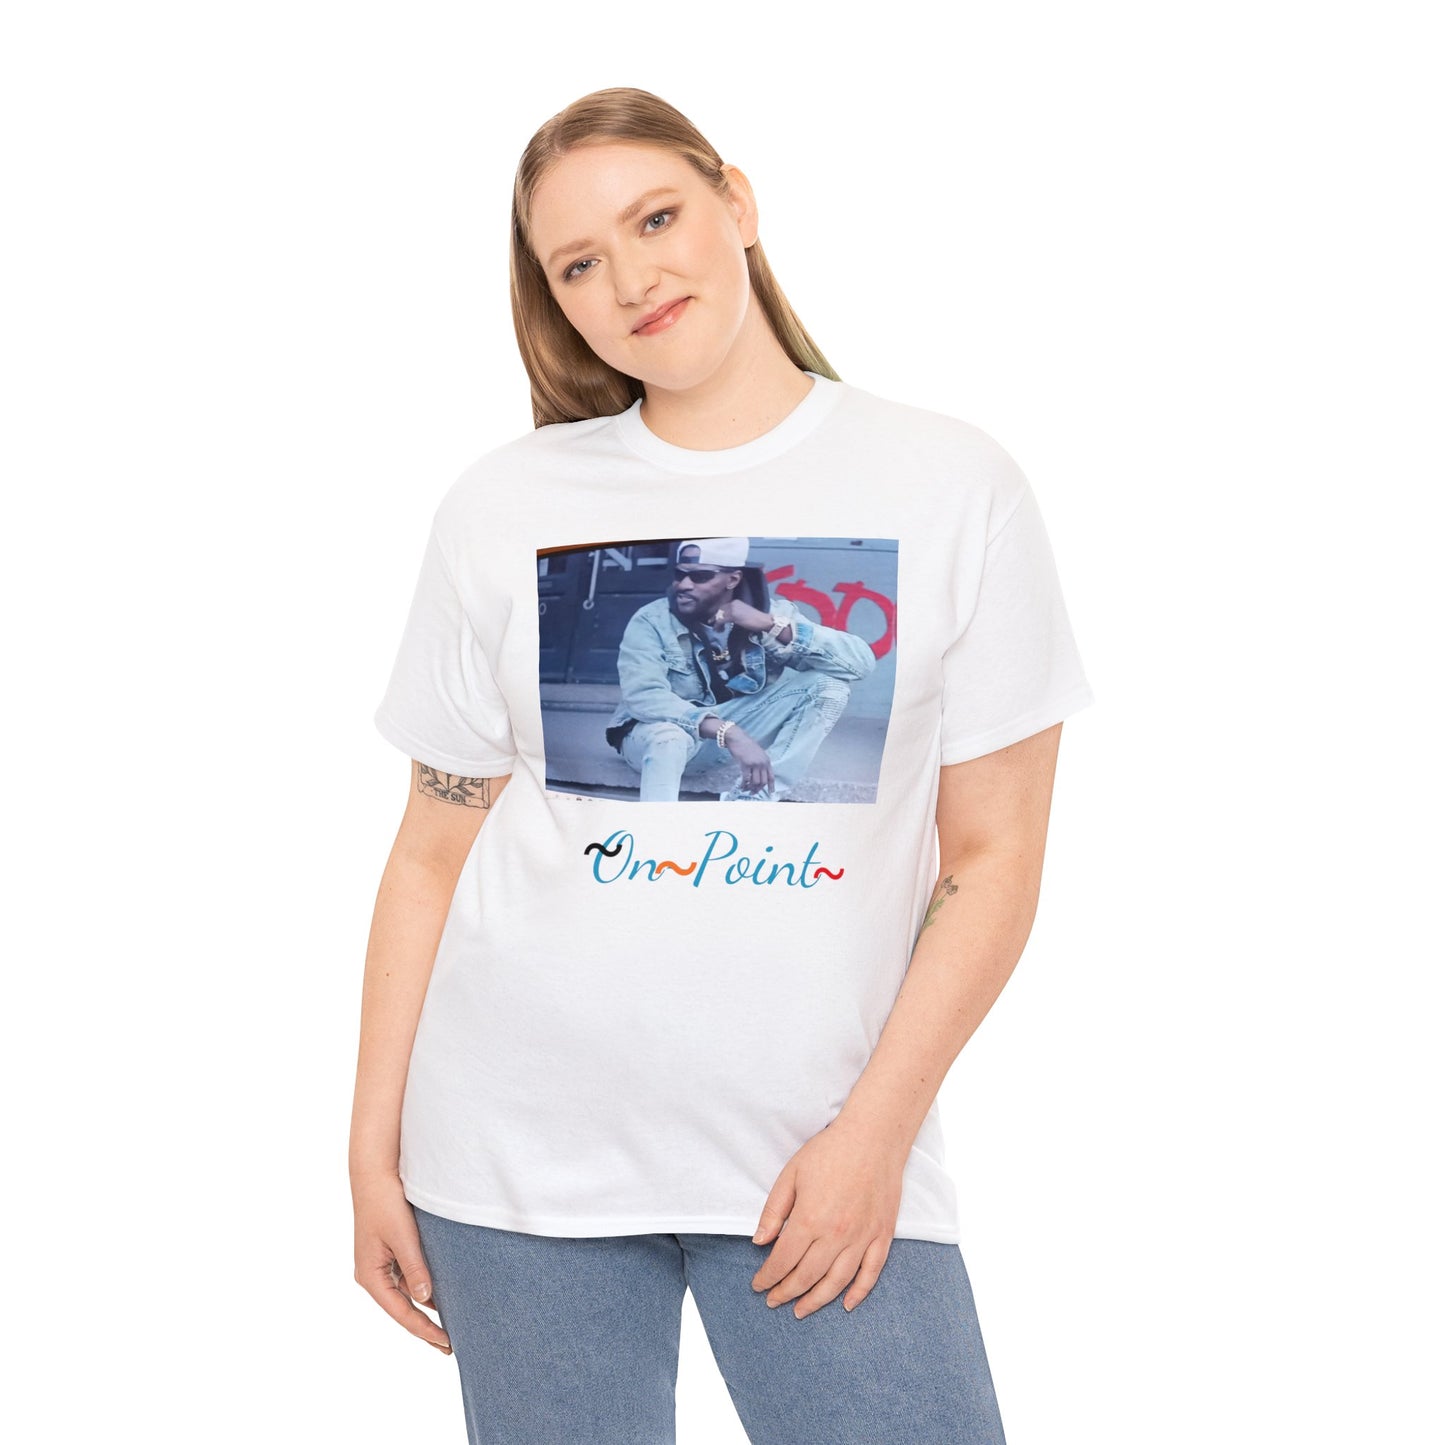 WOW!!! On~point, (Music Video Theme), "LISTEN TO MY TUNES" T-Shirt!!!!!